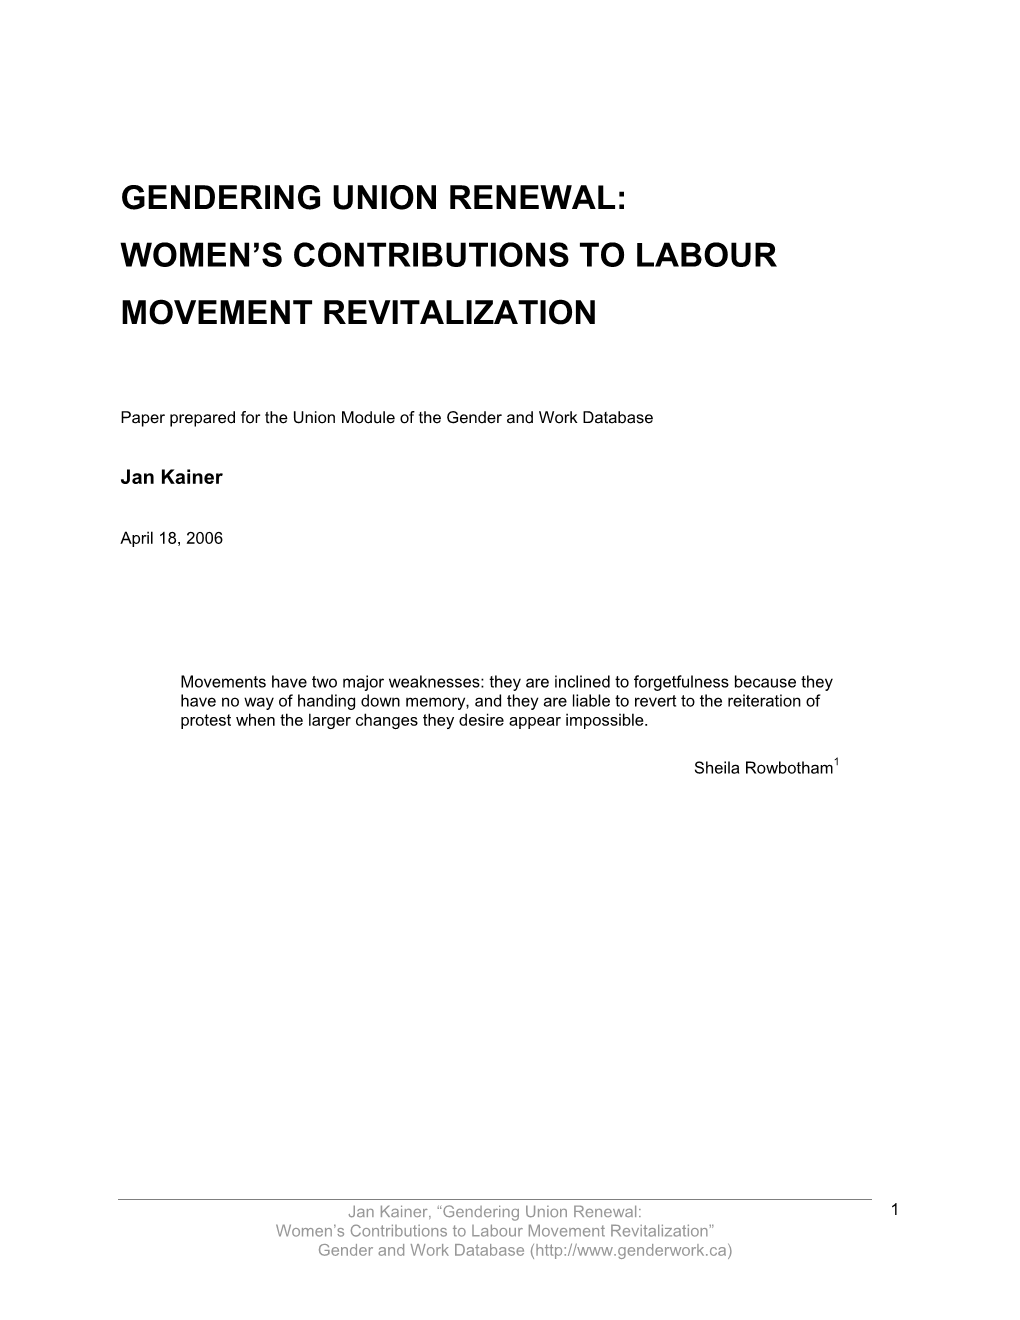 Gendering Union Renewal: Women's Contributions to Labour Movement